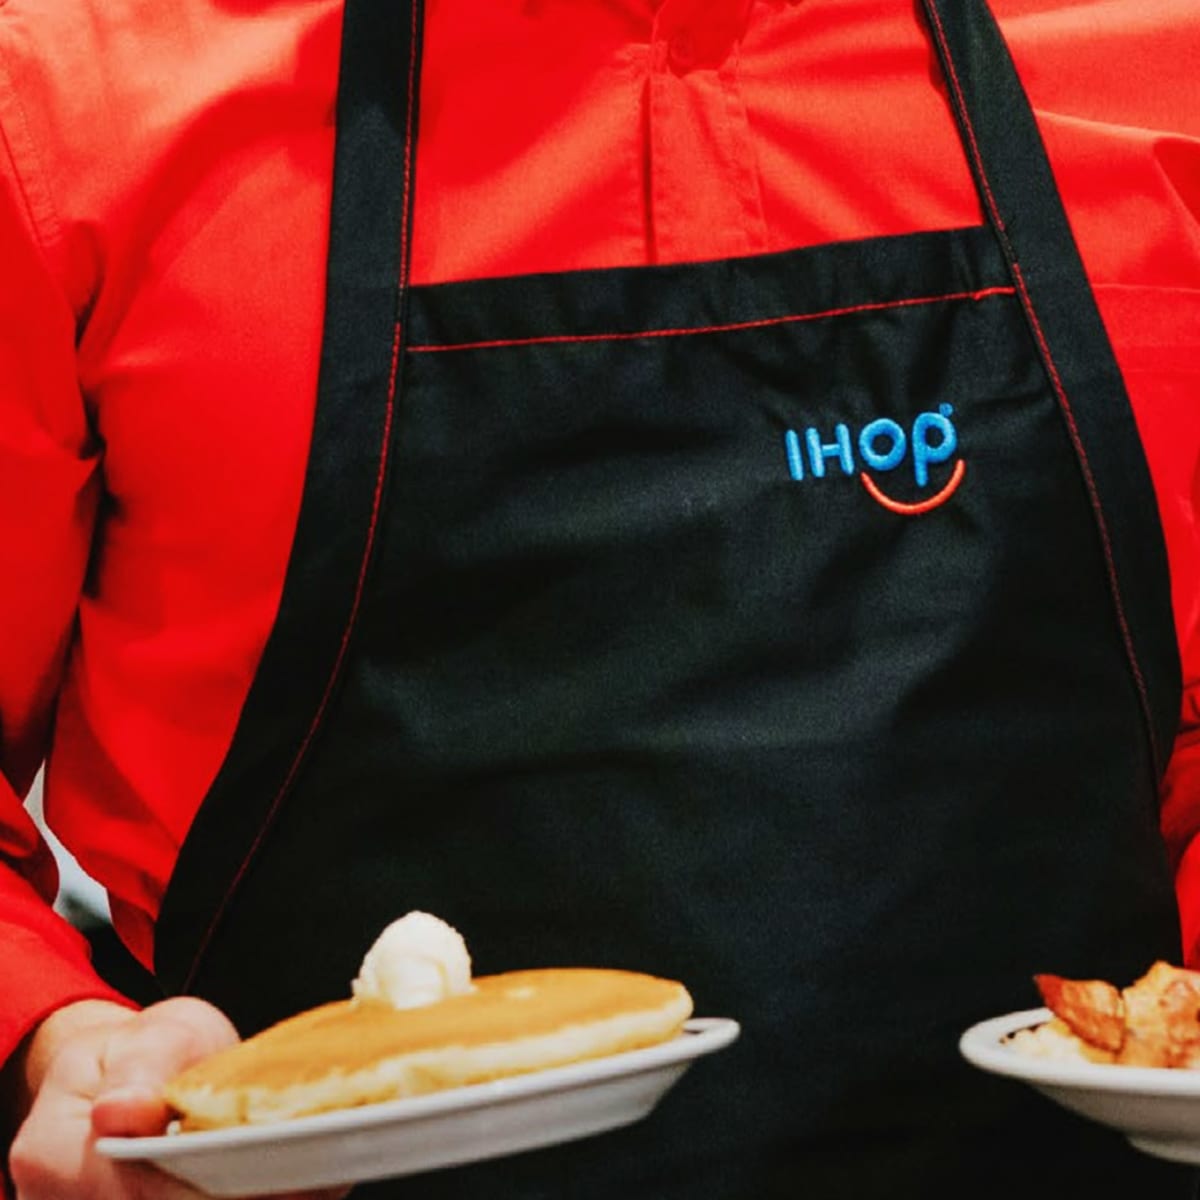 IHOP Restaurant Official MENU NEW 6 page Let's Put a smile on your